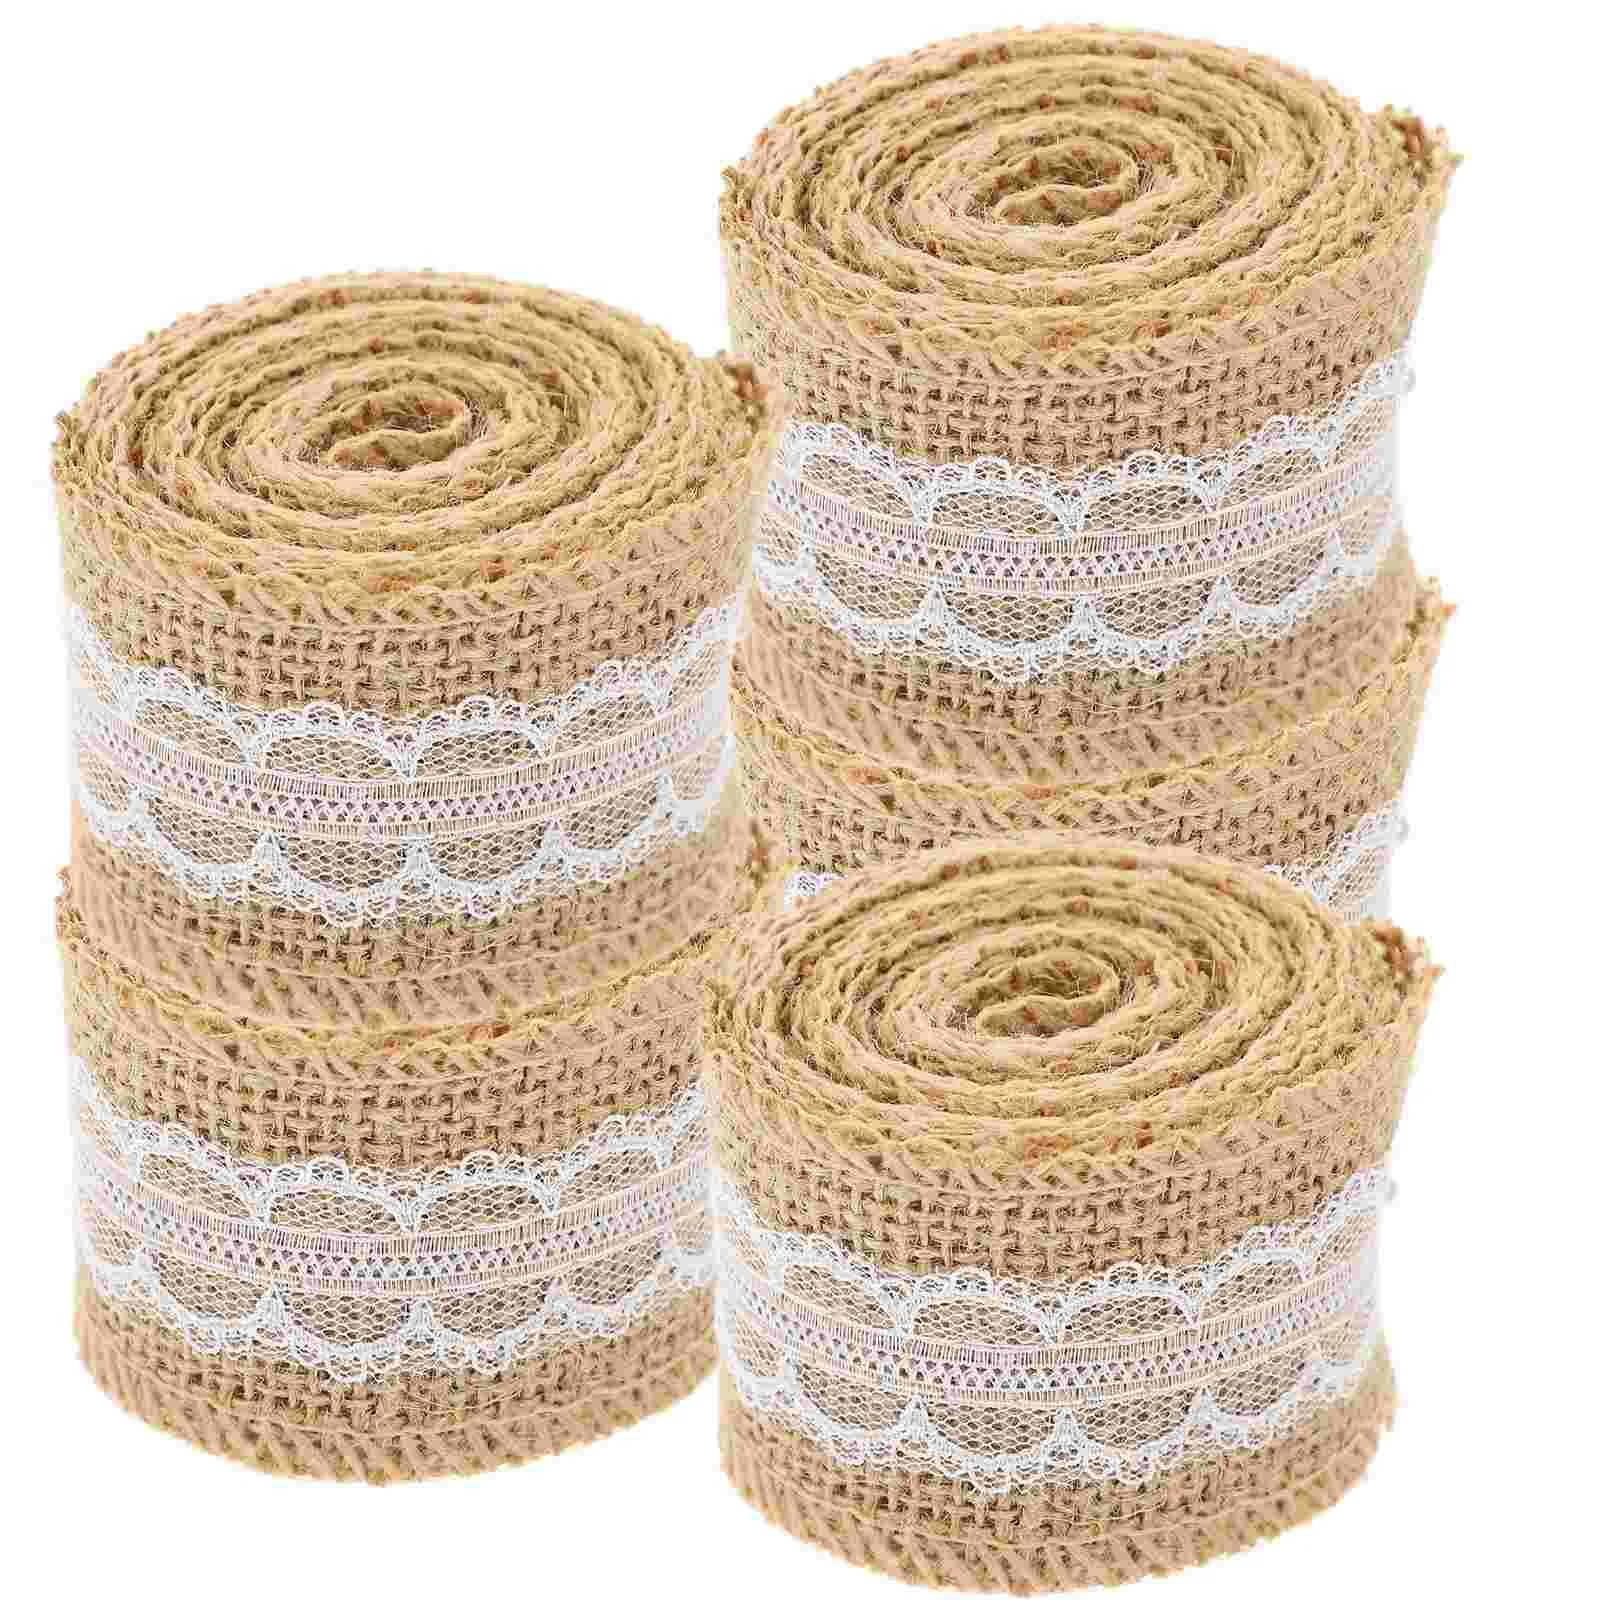 

Ribbons Ribbon Lace Burlap Gift Jute Trims Easter Wrapping Red Wire Rustic Wedding Wreath Craft Natural Flower Floral Favors